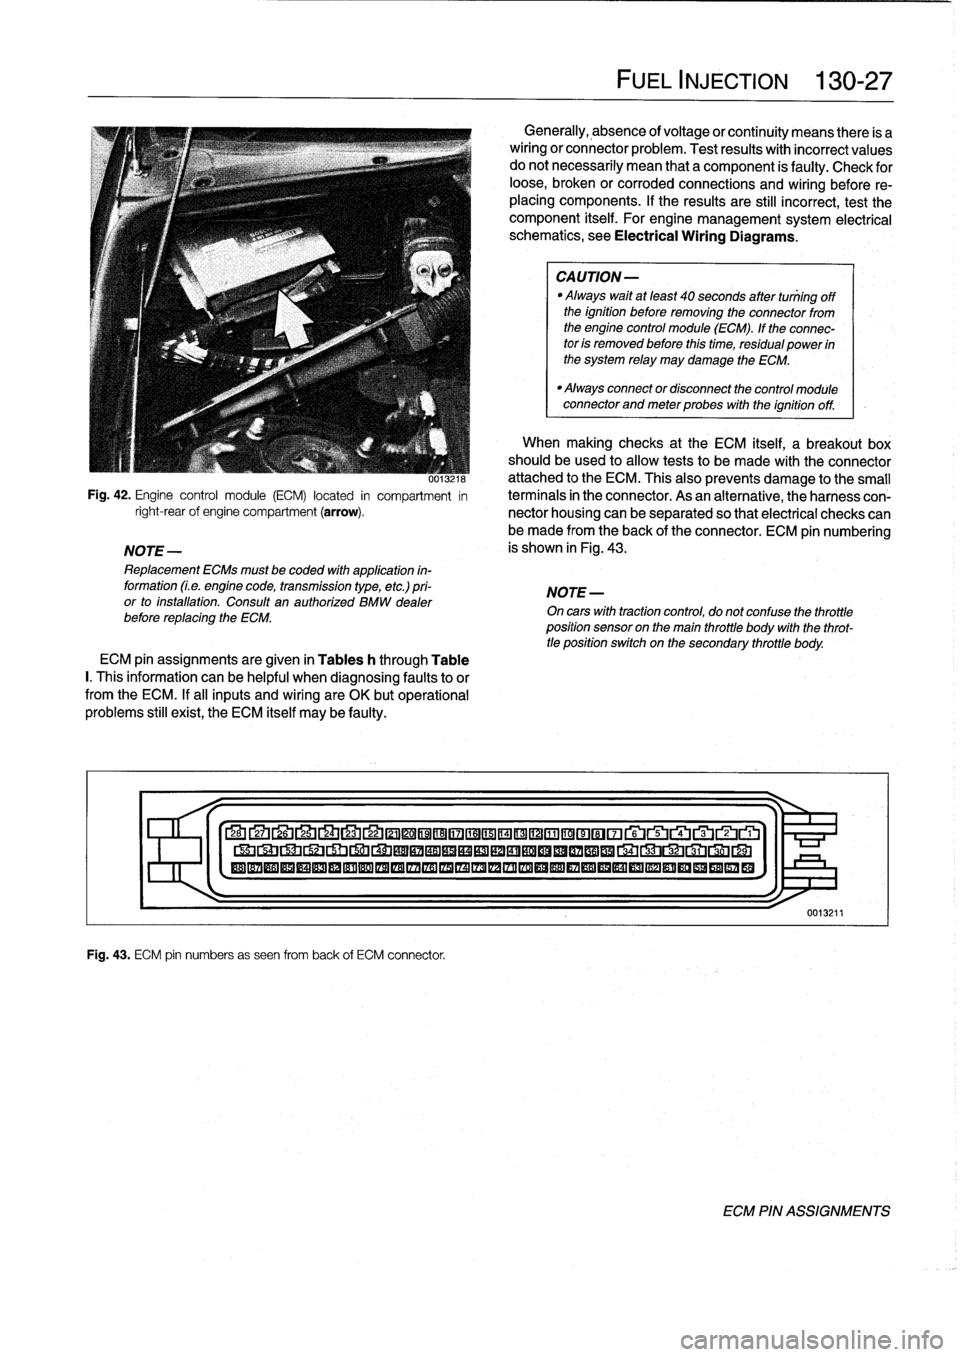 BMW 328i 1992 E36 Workshop Manual 
0013ZIM
Fig
.
42
.
Engine
control
module
(ECM)
located
in
compartment
in
right-rearof
engine
compartment
(arrow)
.

NOTE-

Replacement
ECMs
must
be
coded
with
application
in-
formation
(Le
.
engine
c